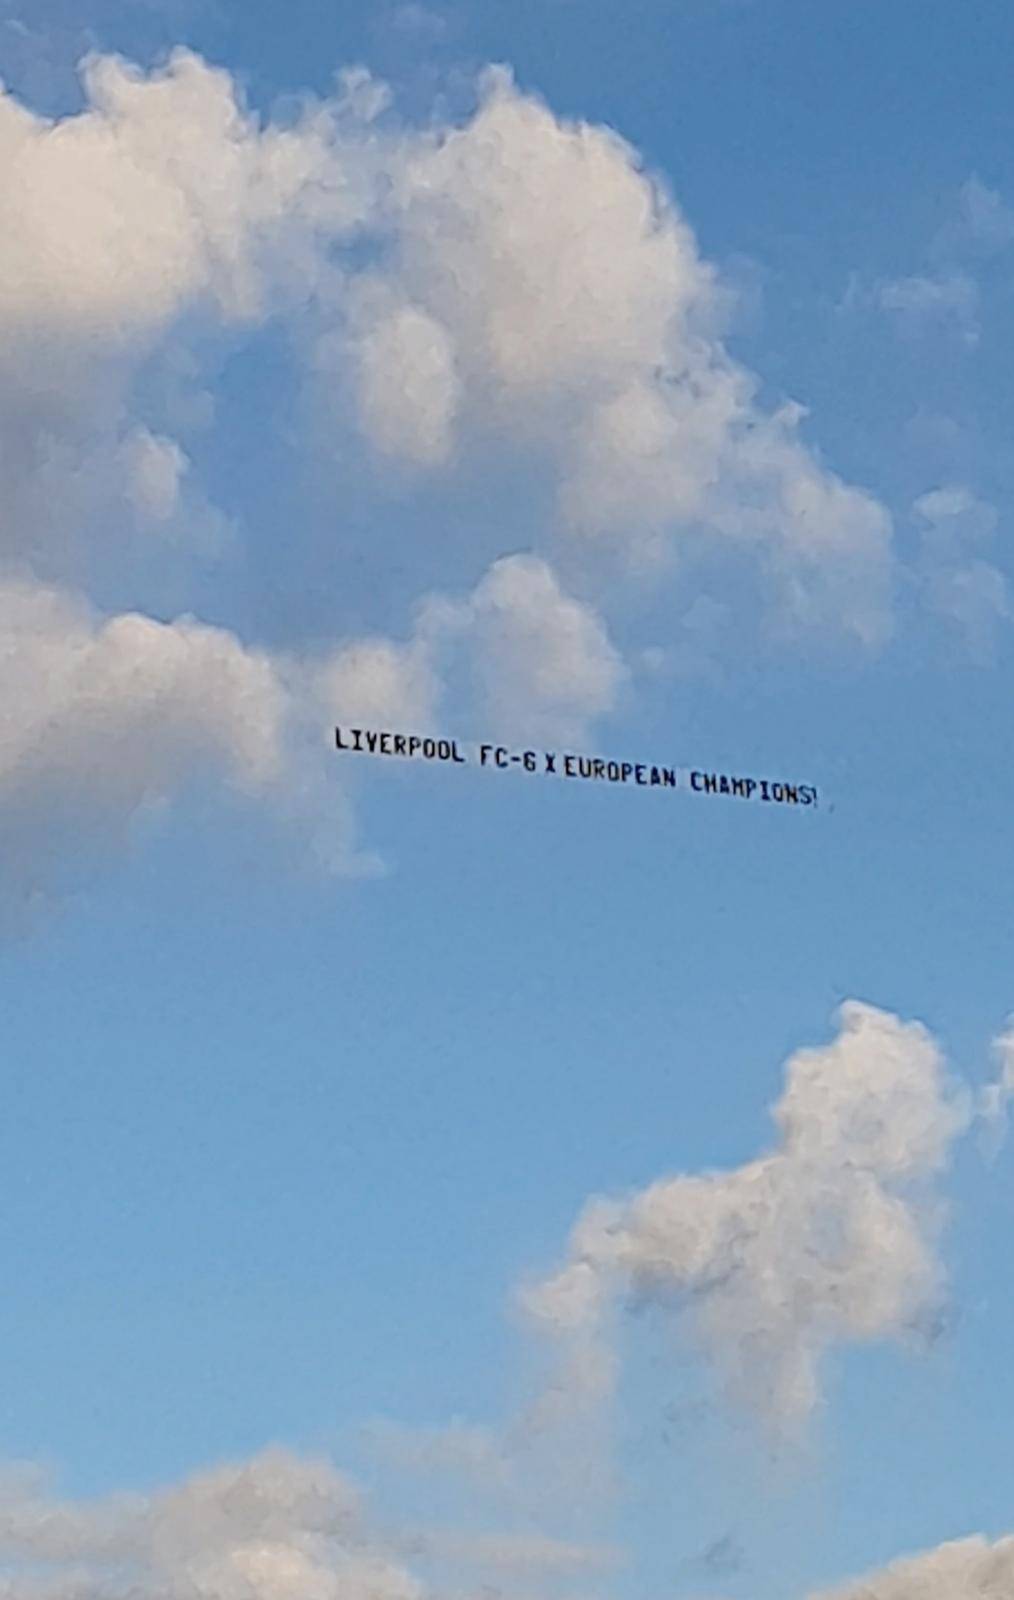 A banner carried by the plane that reads: "Liverpool: 6x European champions" is spotted over the WACA stadium, during the Manchester United training in Perth